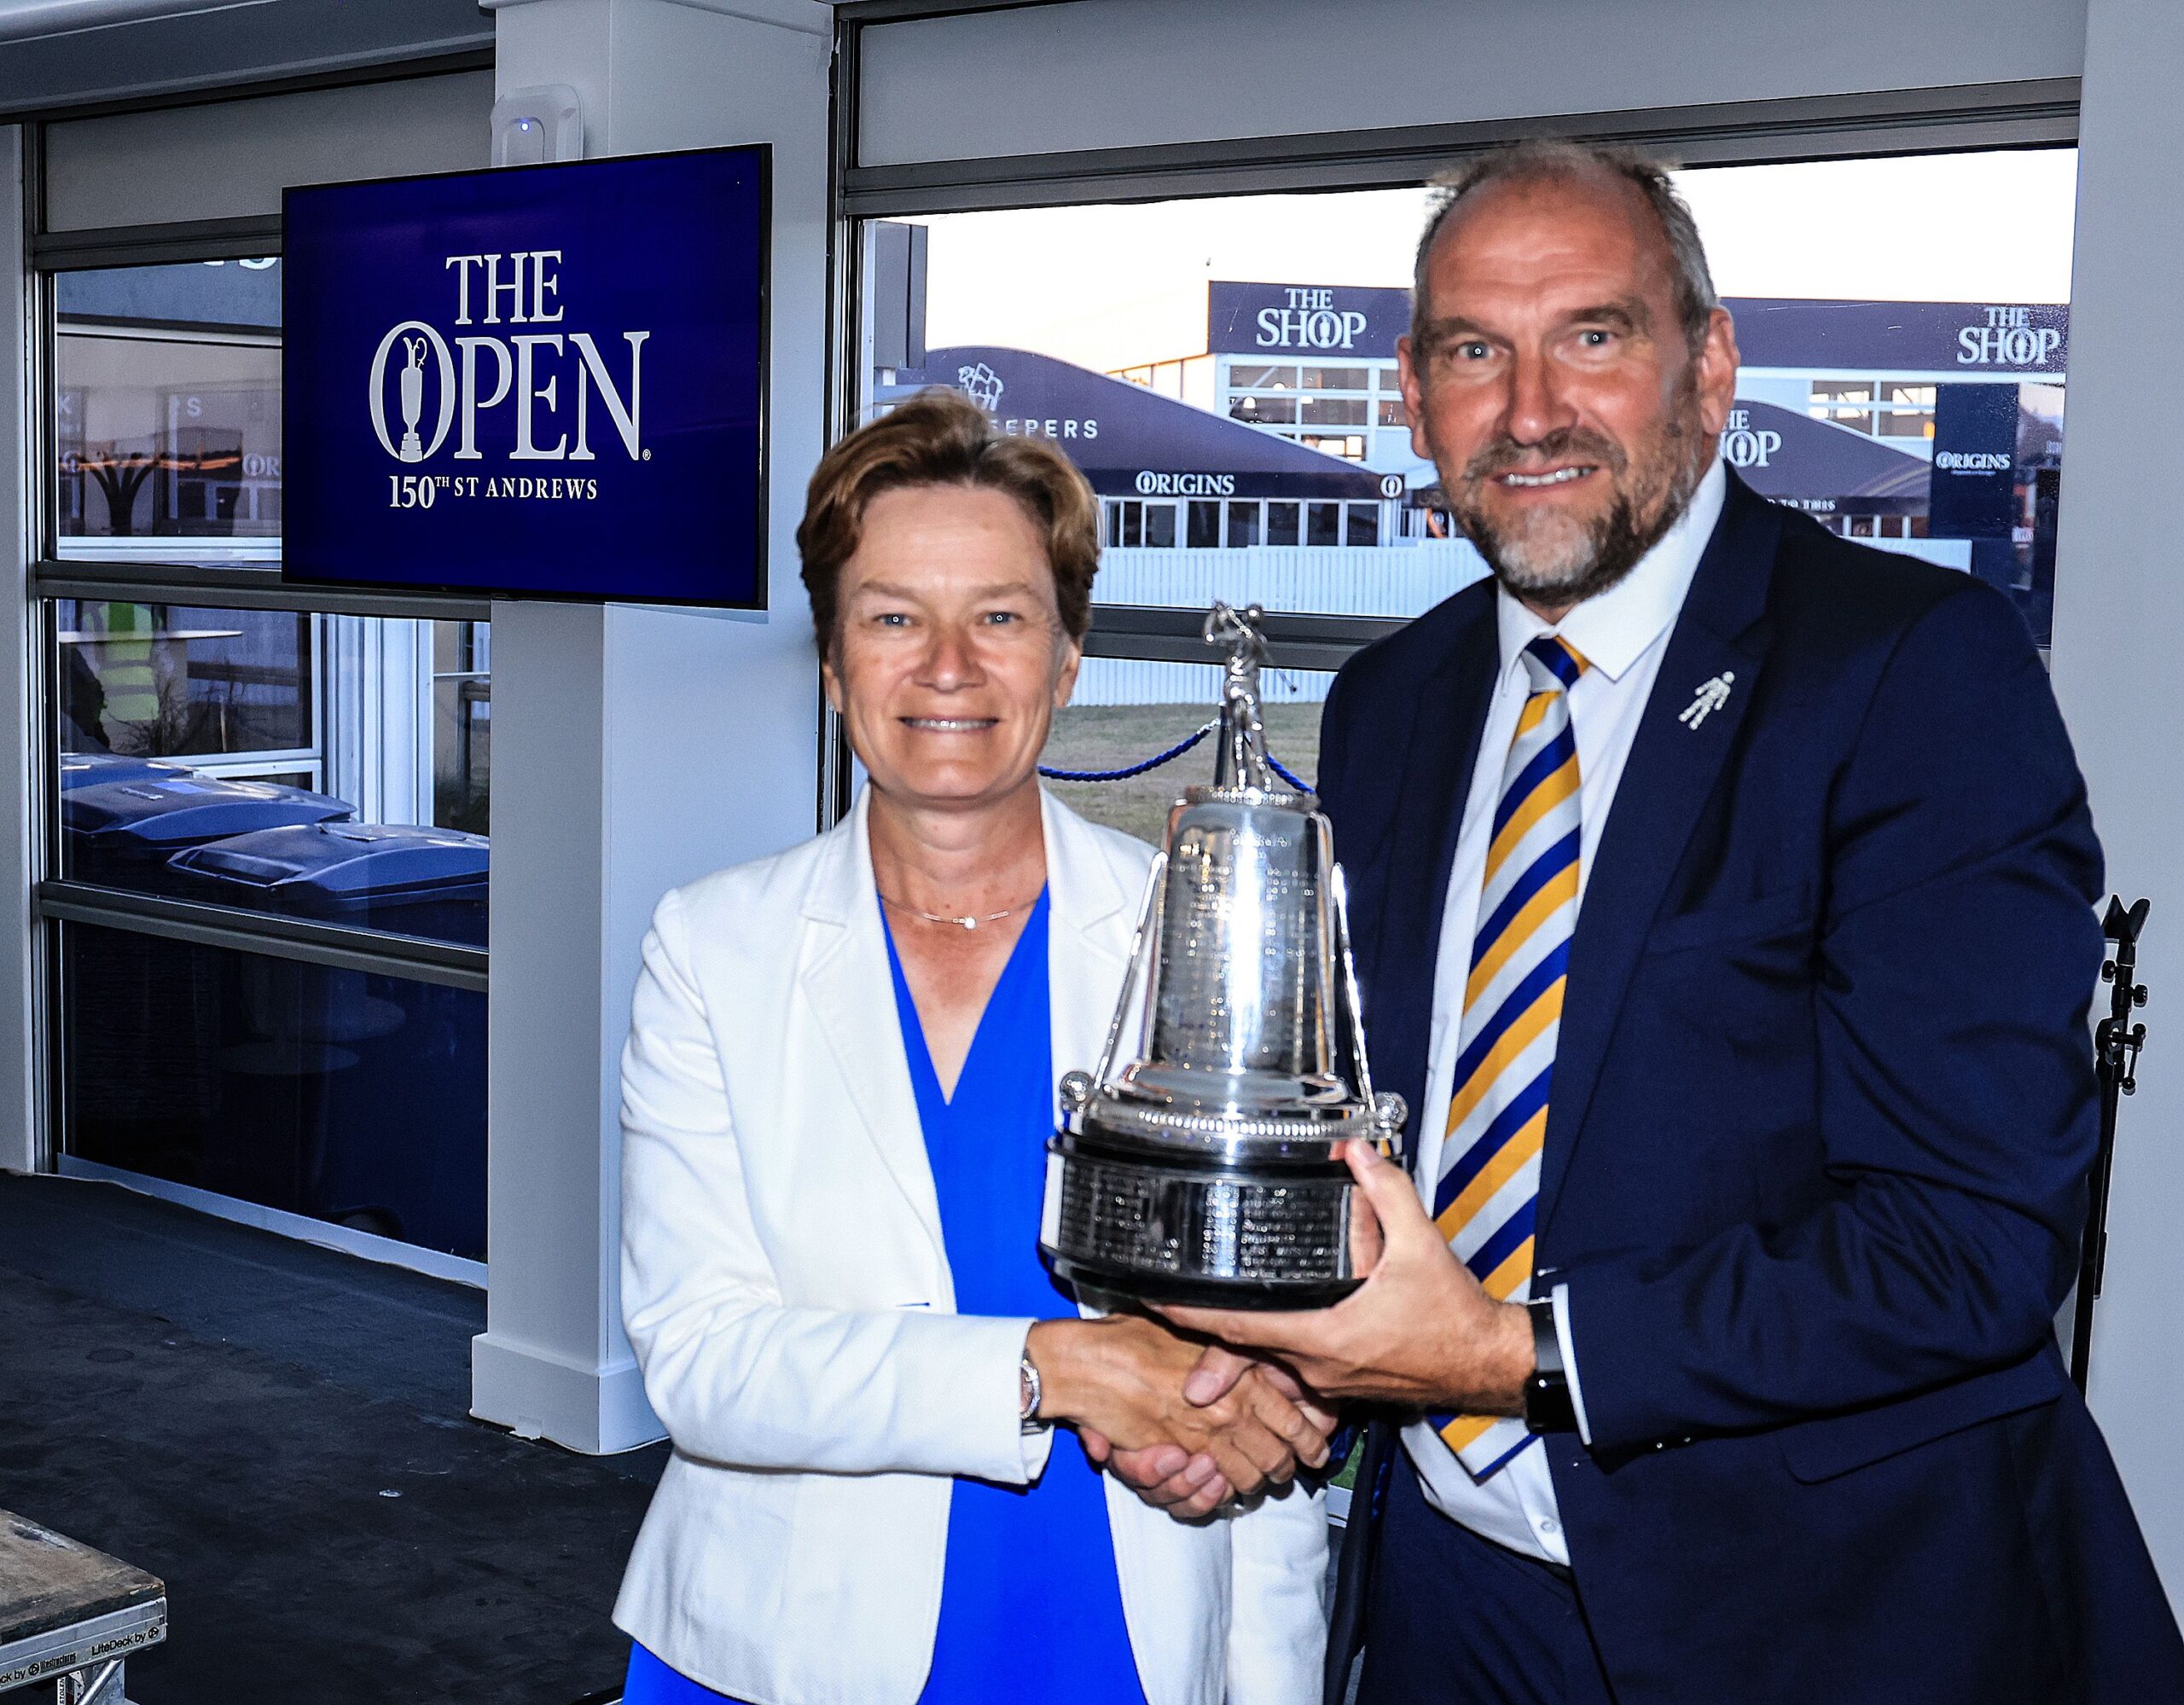 AGW Annual Dinner – Victorious 2021 Solheim Cup Team Honoured Along With Billy Foster & Sandy Lyle Winning Awards